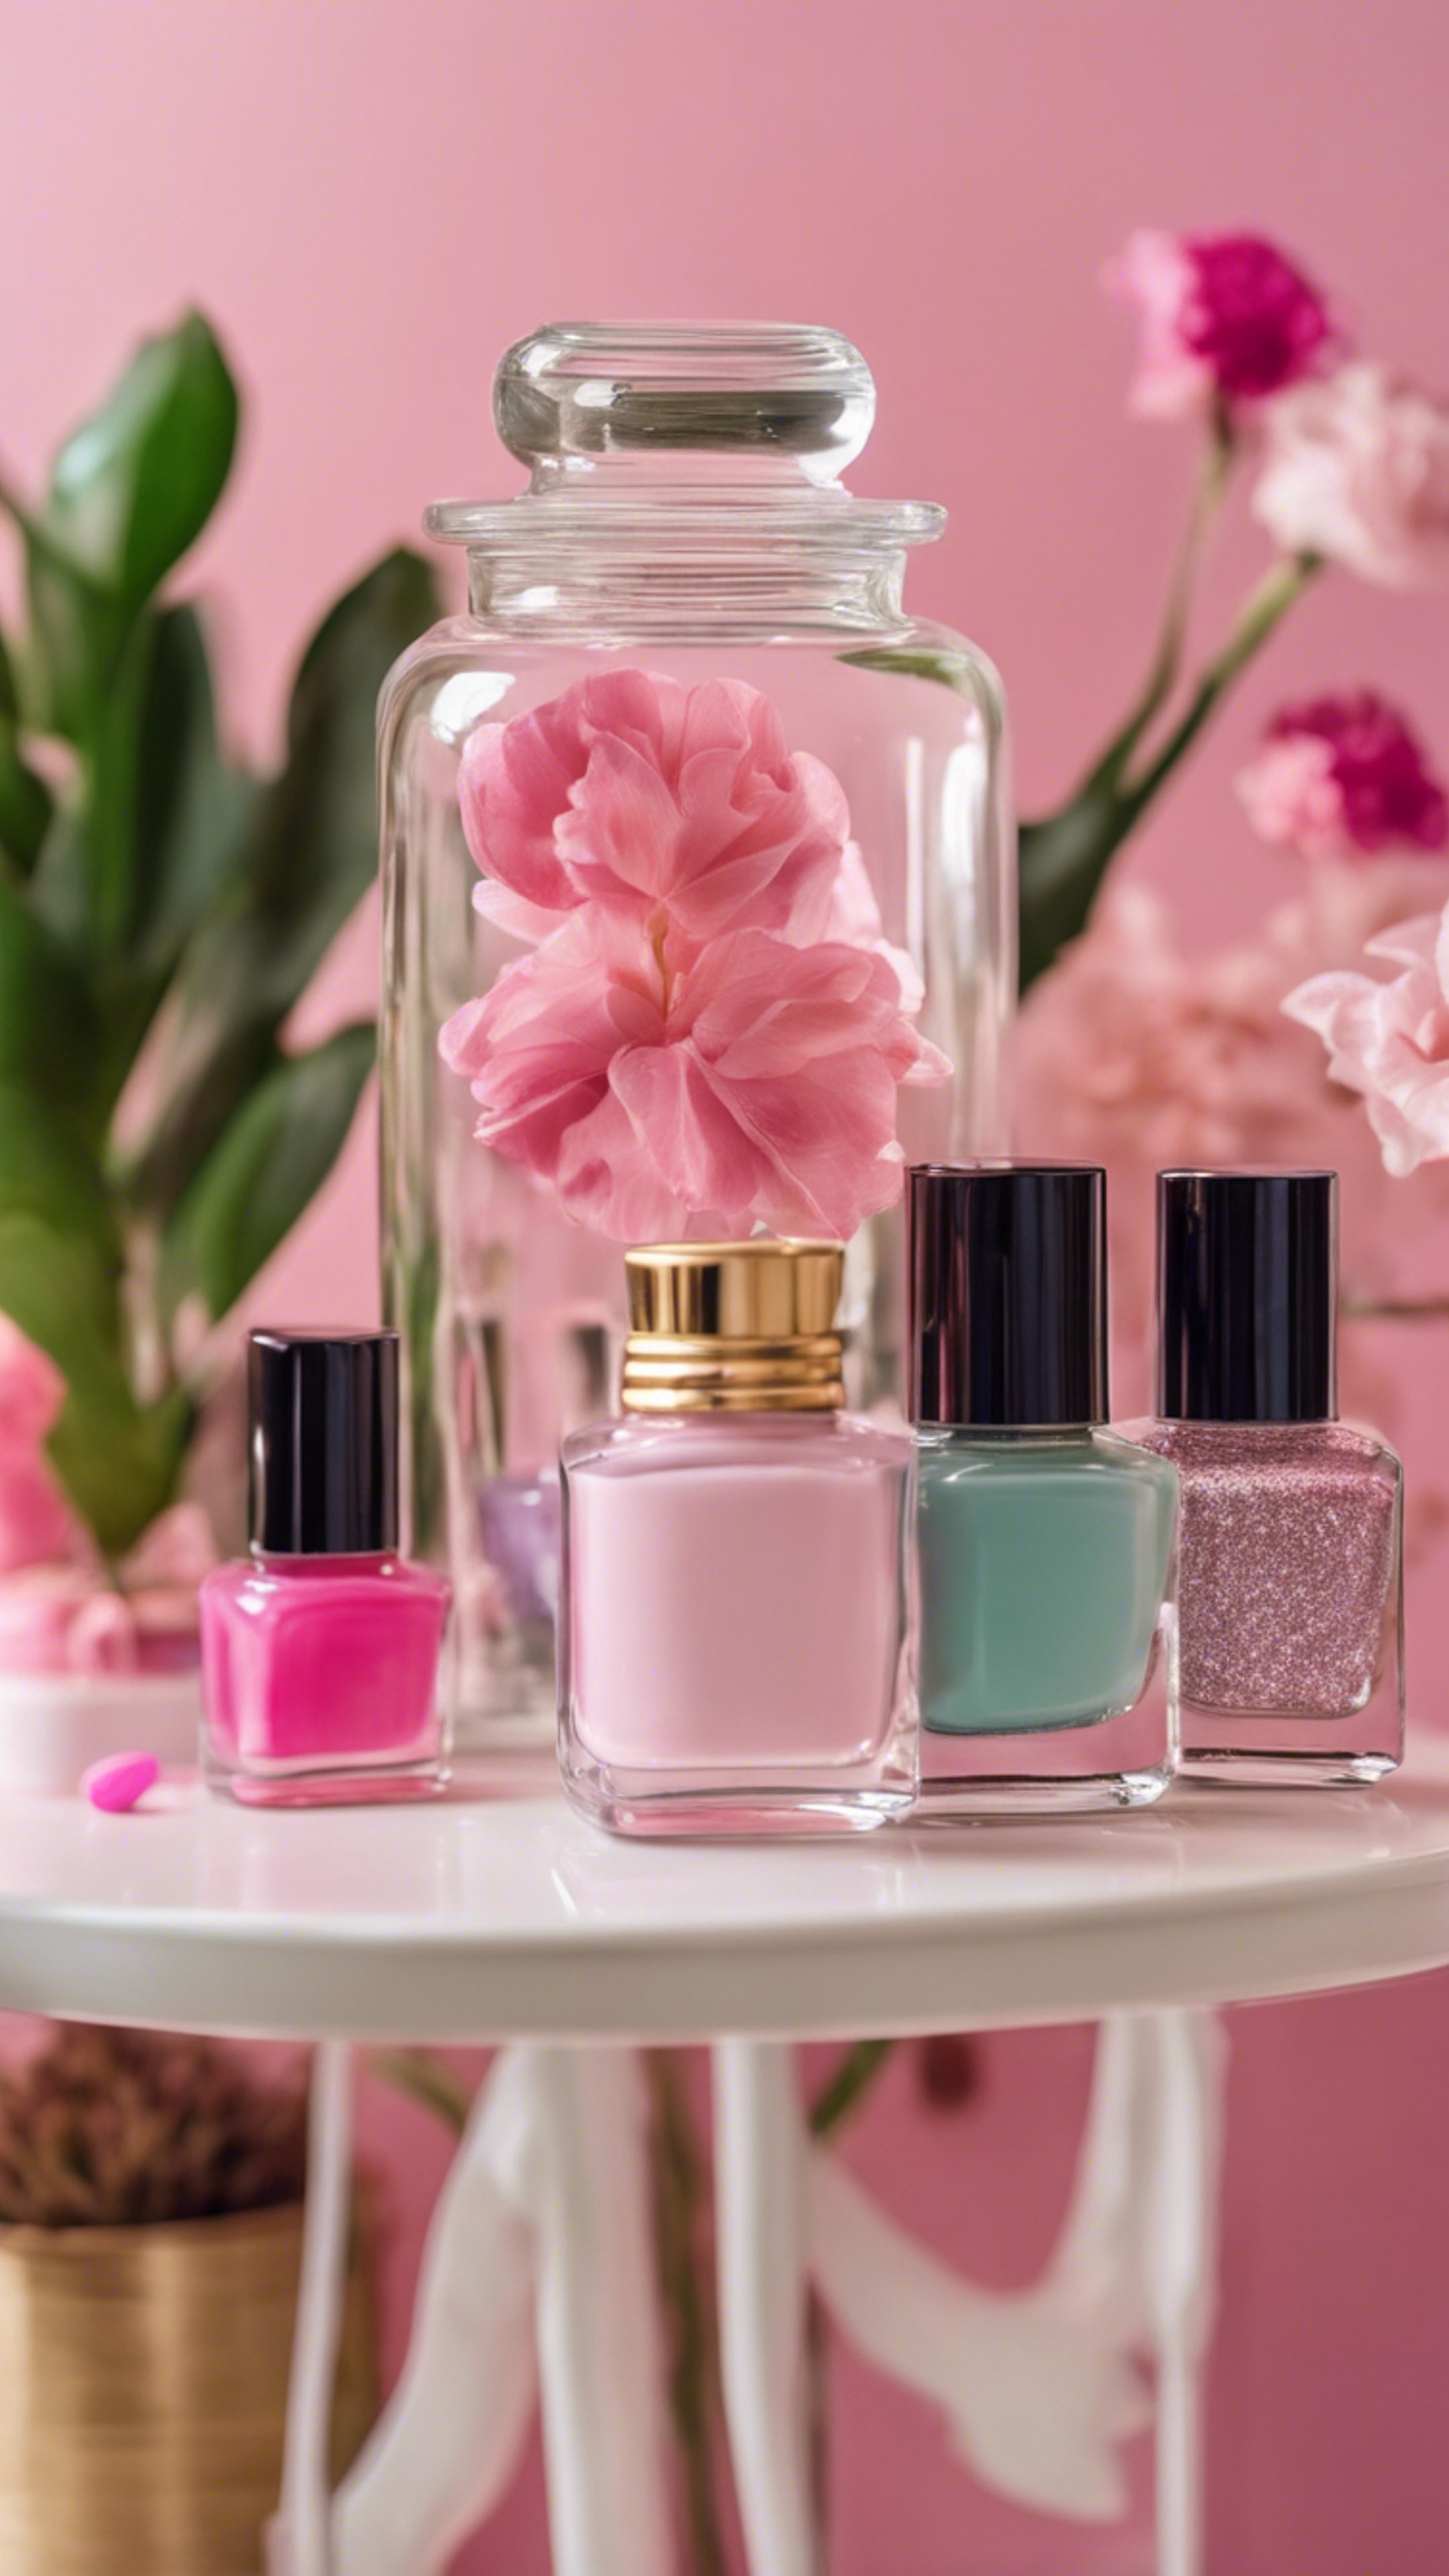 A glass jar full of colorful girly nail polishes on a pink dressing table with a chic plant in the background.壁紙[6e6d72fe0d8e4450902a]